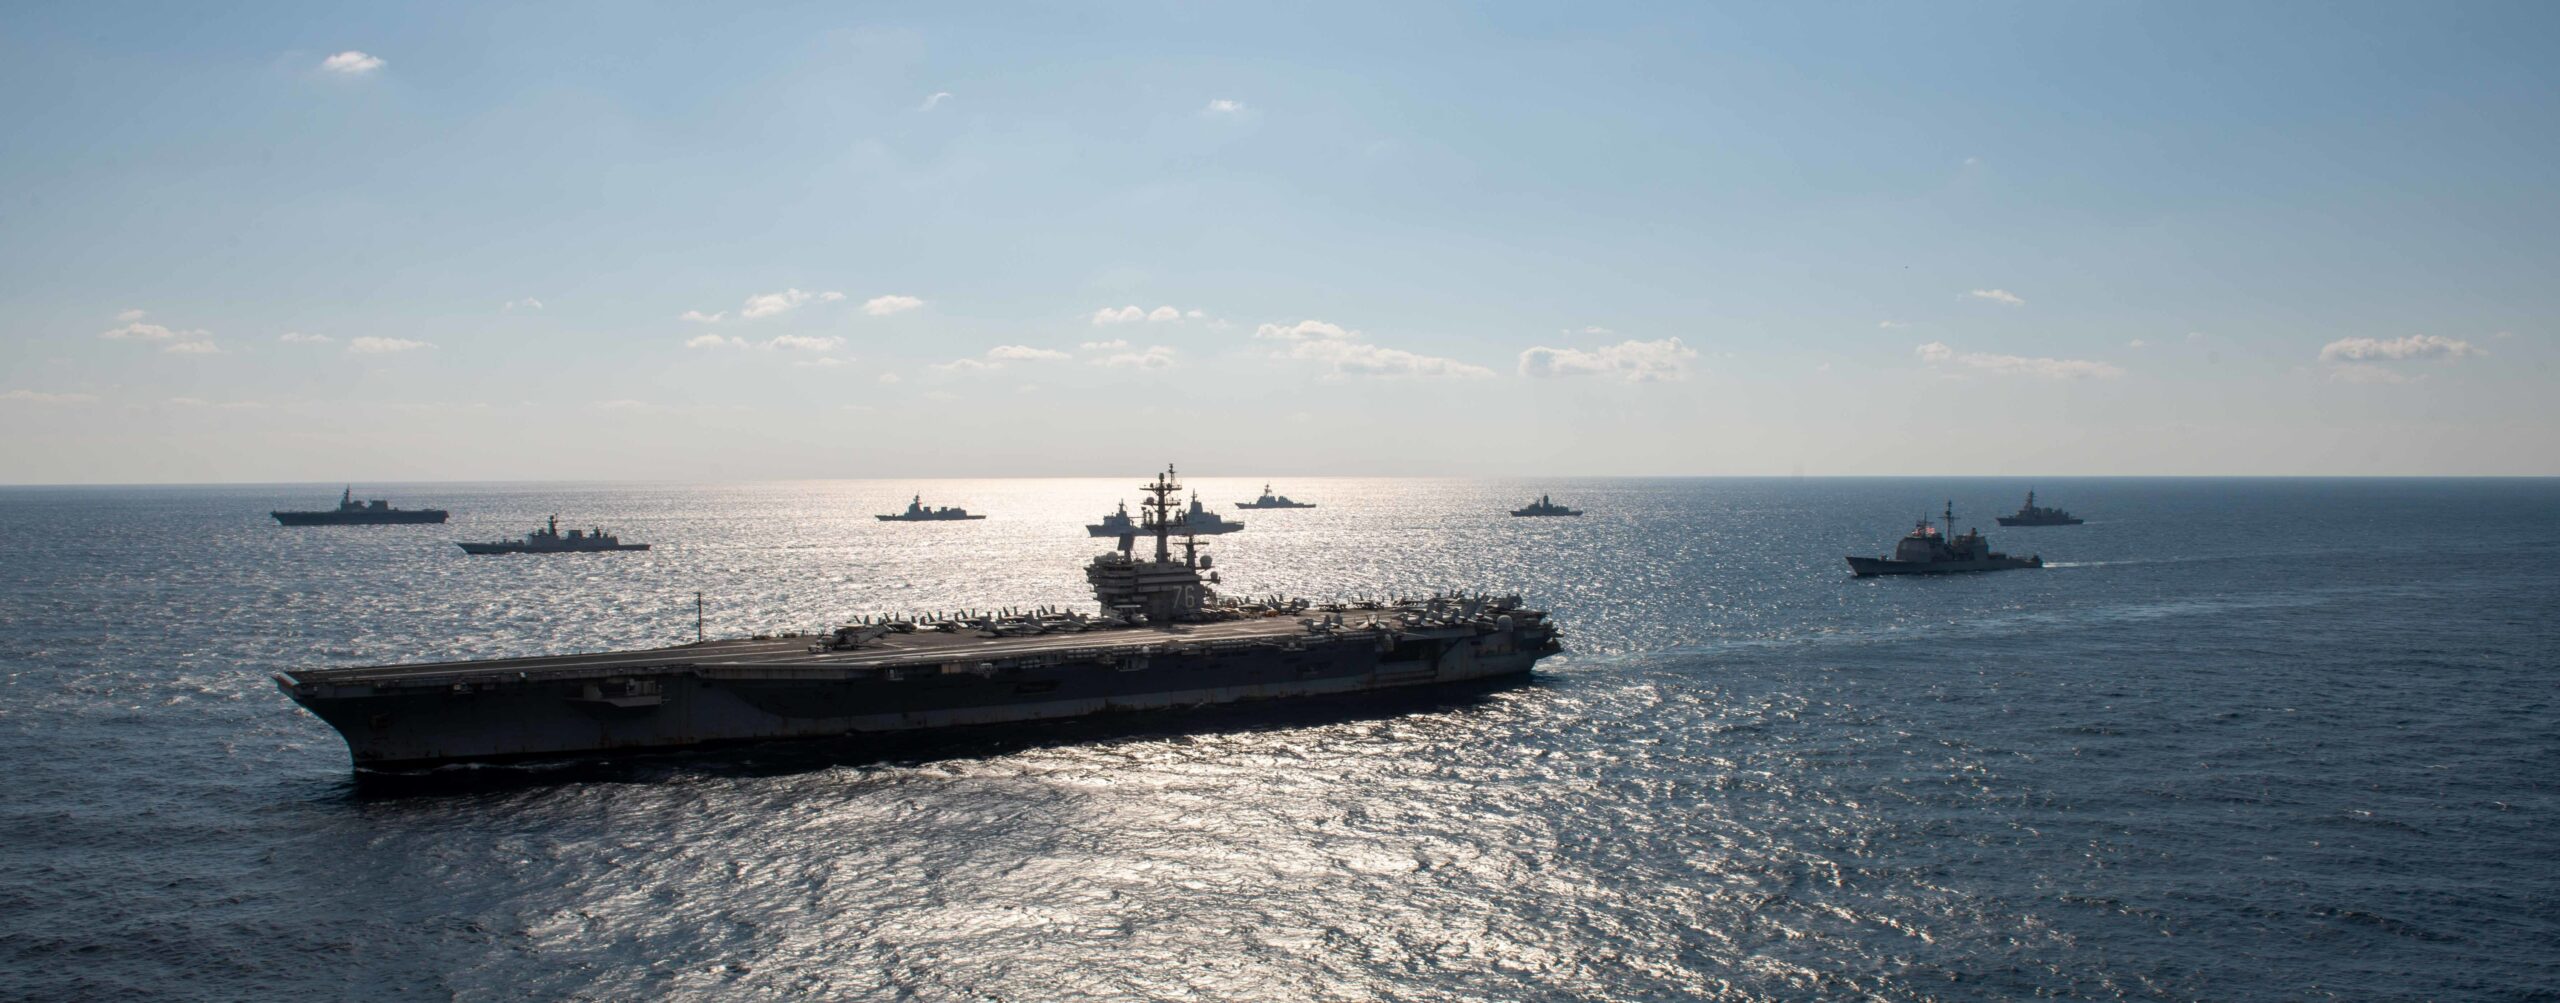 The US Navy’s only forward-deployed aircraft carrier, USS Ronald Reagan (CVN 76), steams in formation with ships from the Japan Maritime Self-Defense Force, Royal Australian Navy, and Indian Navy during Exercise Malabar 2022